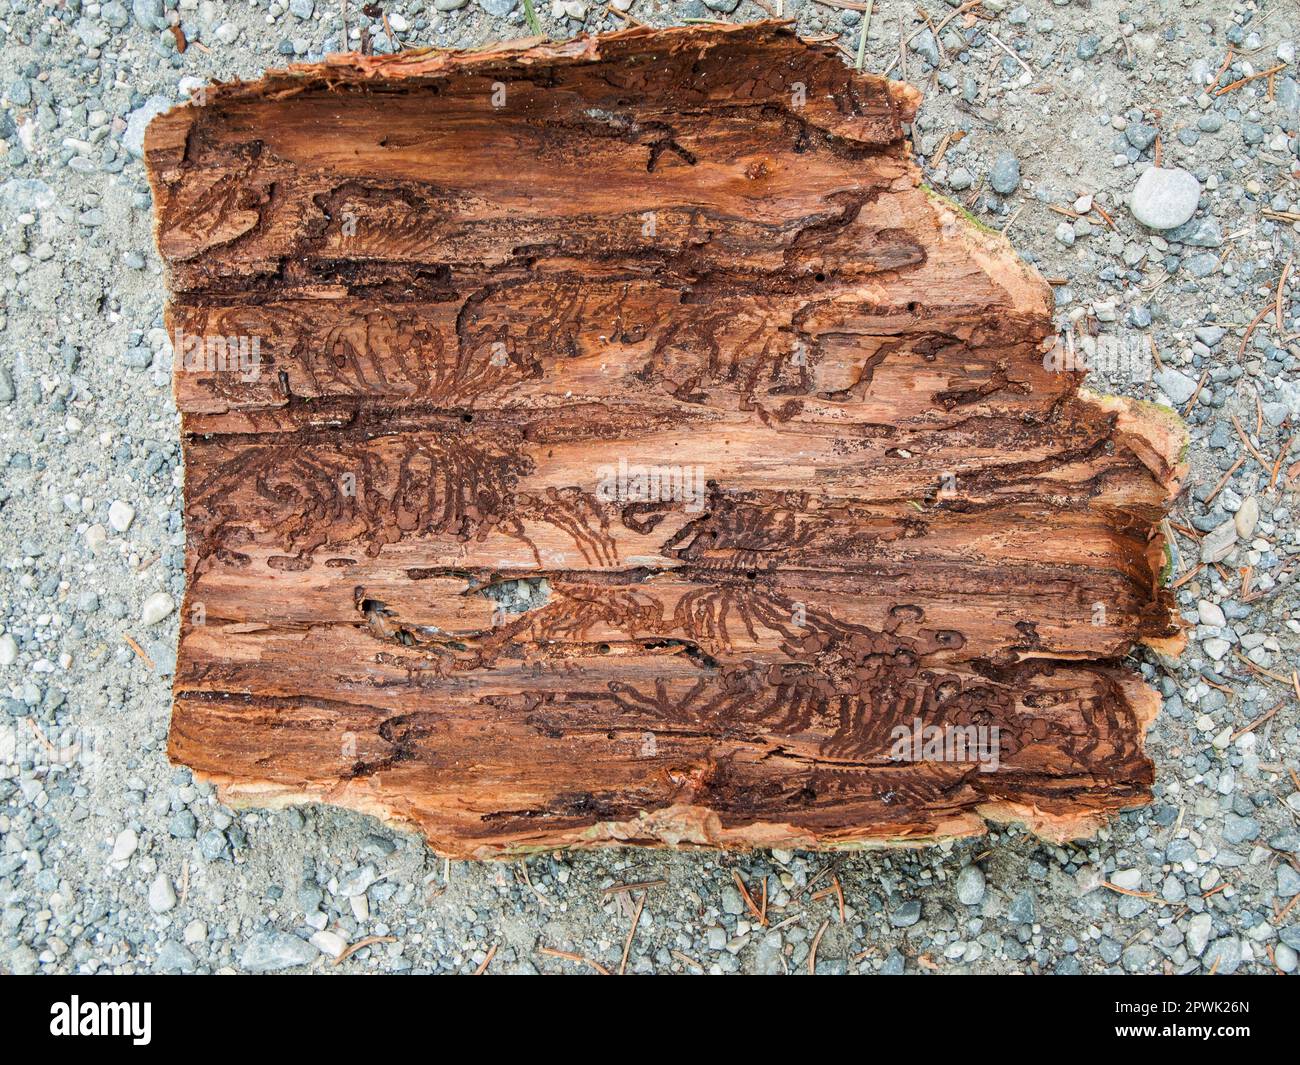 Close-up view of the inside of a piece of tree bark with bark beetle feeding marks on fine gravel subsoil in top view. Stock Photo